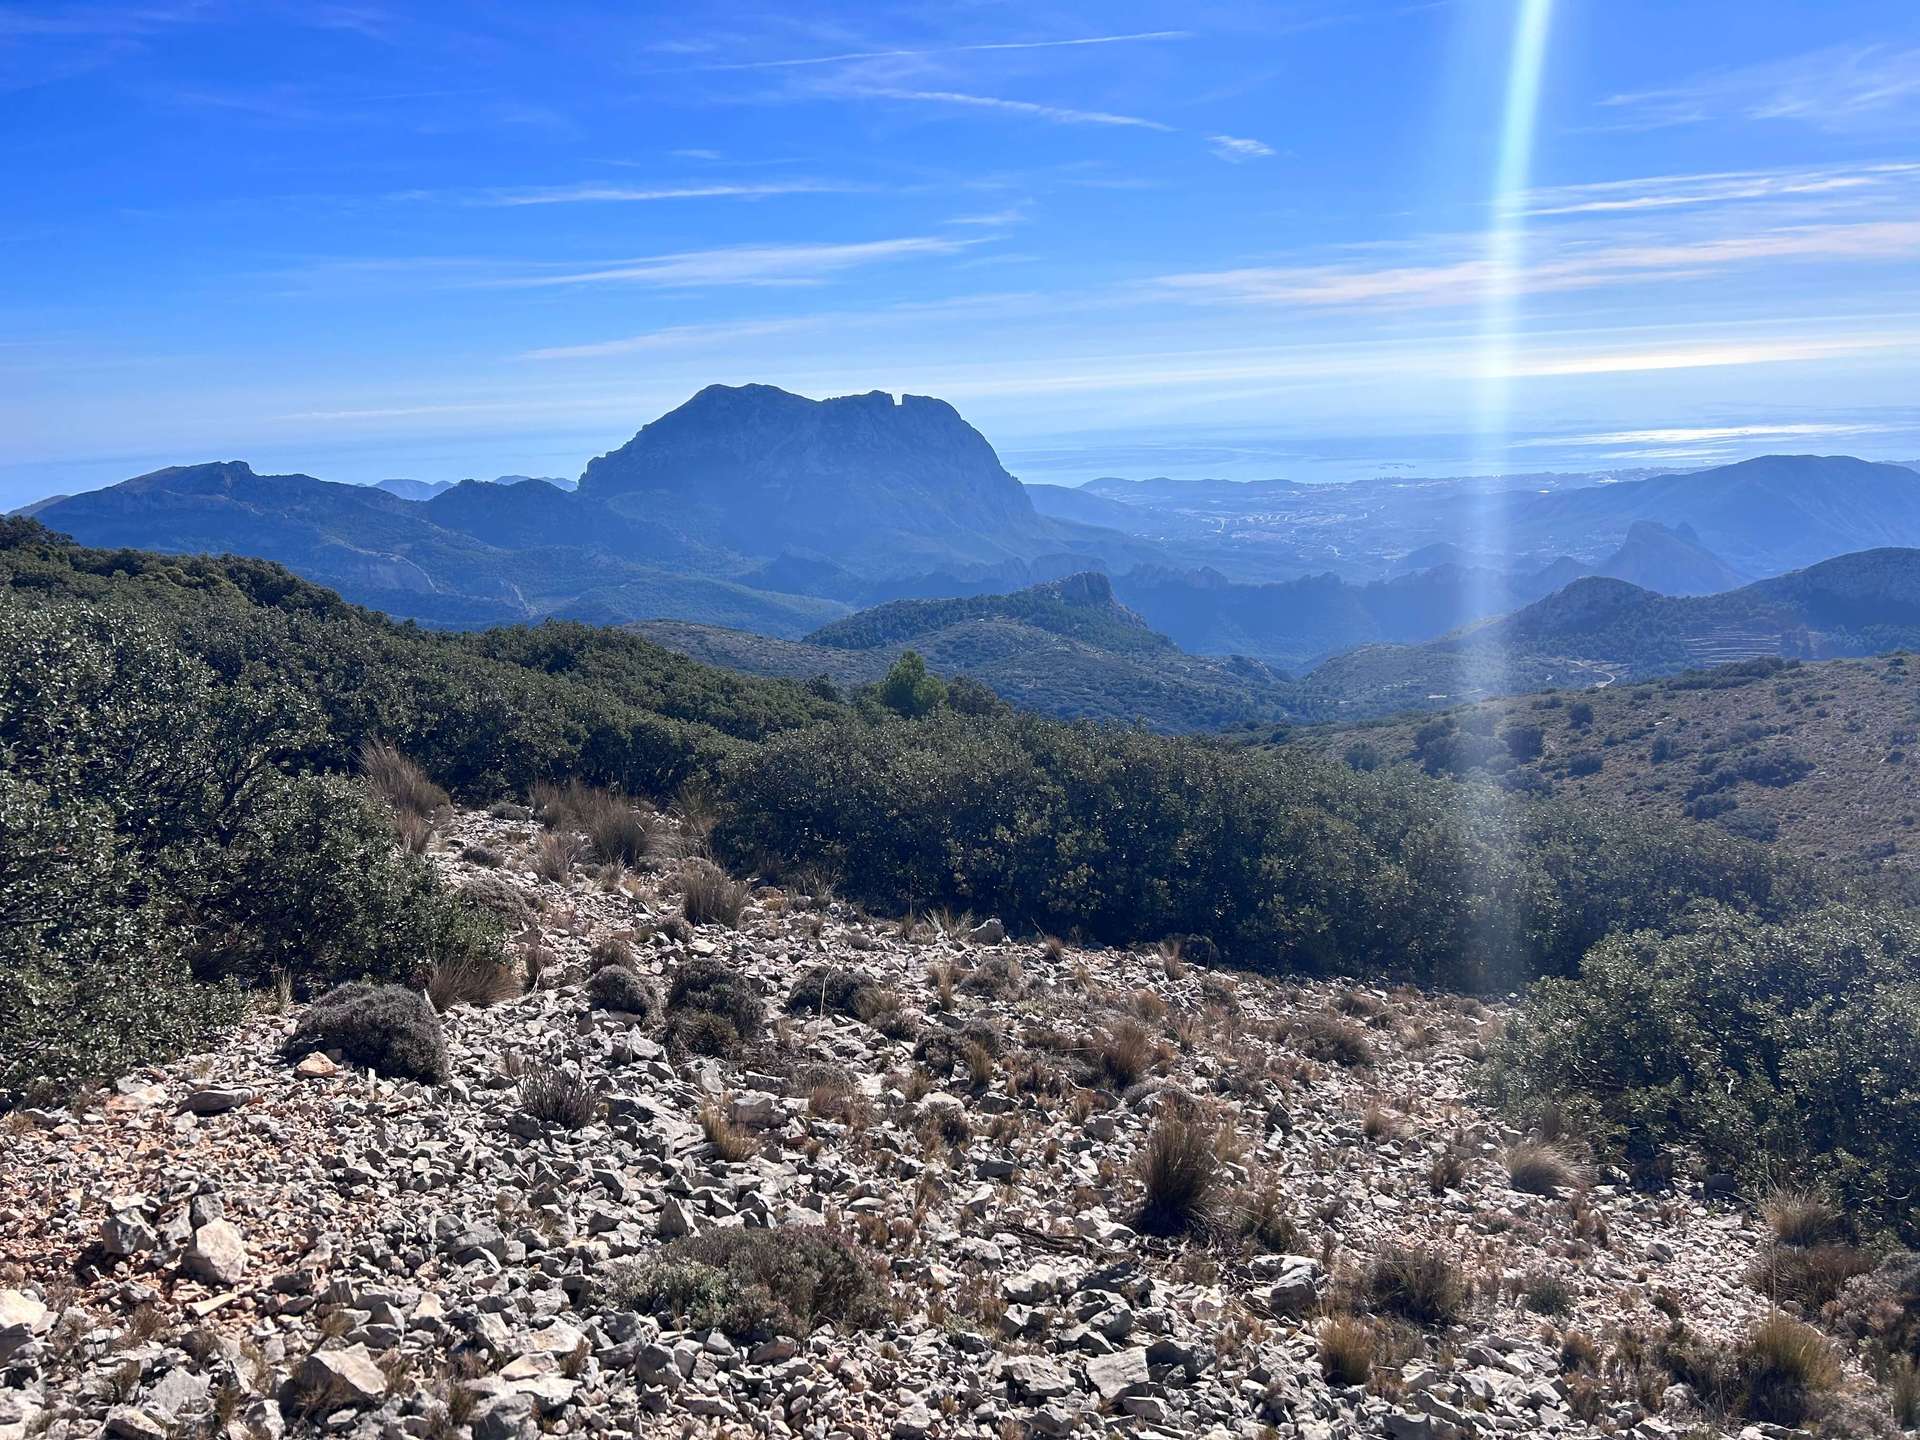 View from Aitana, the highest mountain in the Alicante province. Puig Campana from before in the distance.